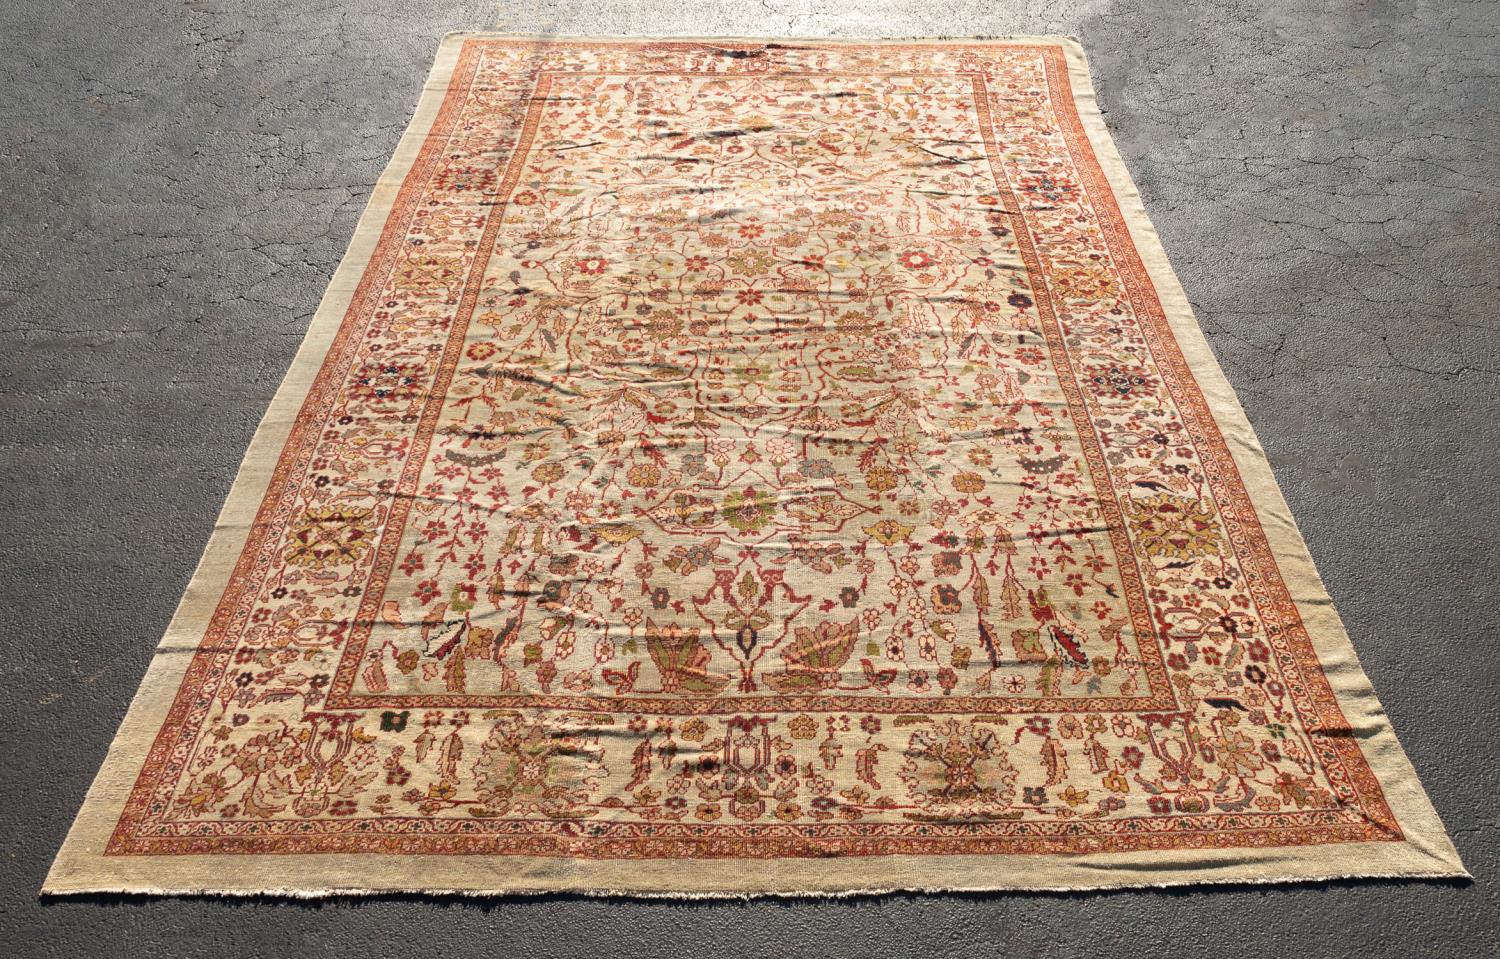 HAND WOVEN TURKISH SULTANABAD RUG  35a532